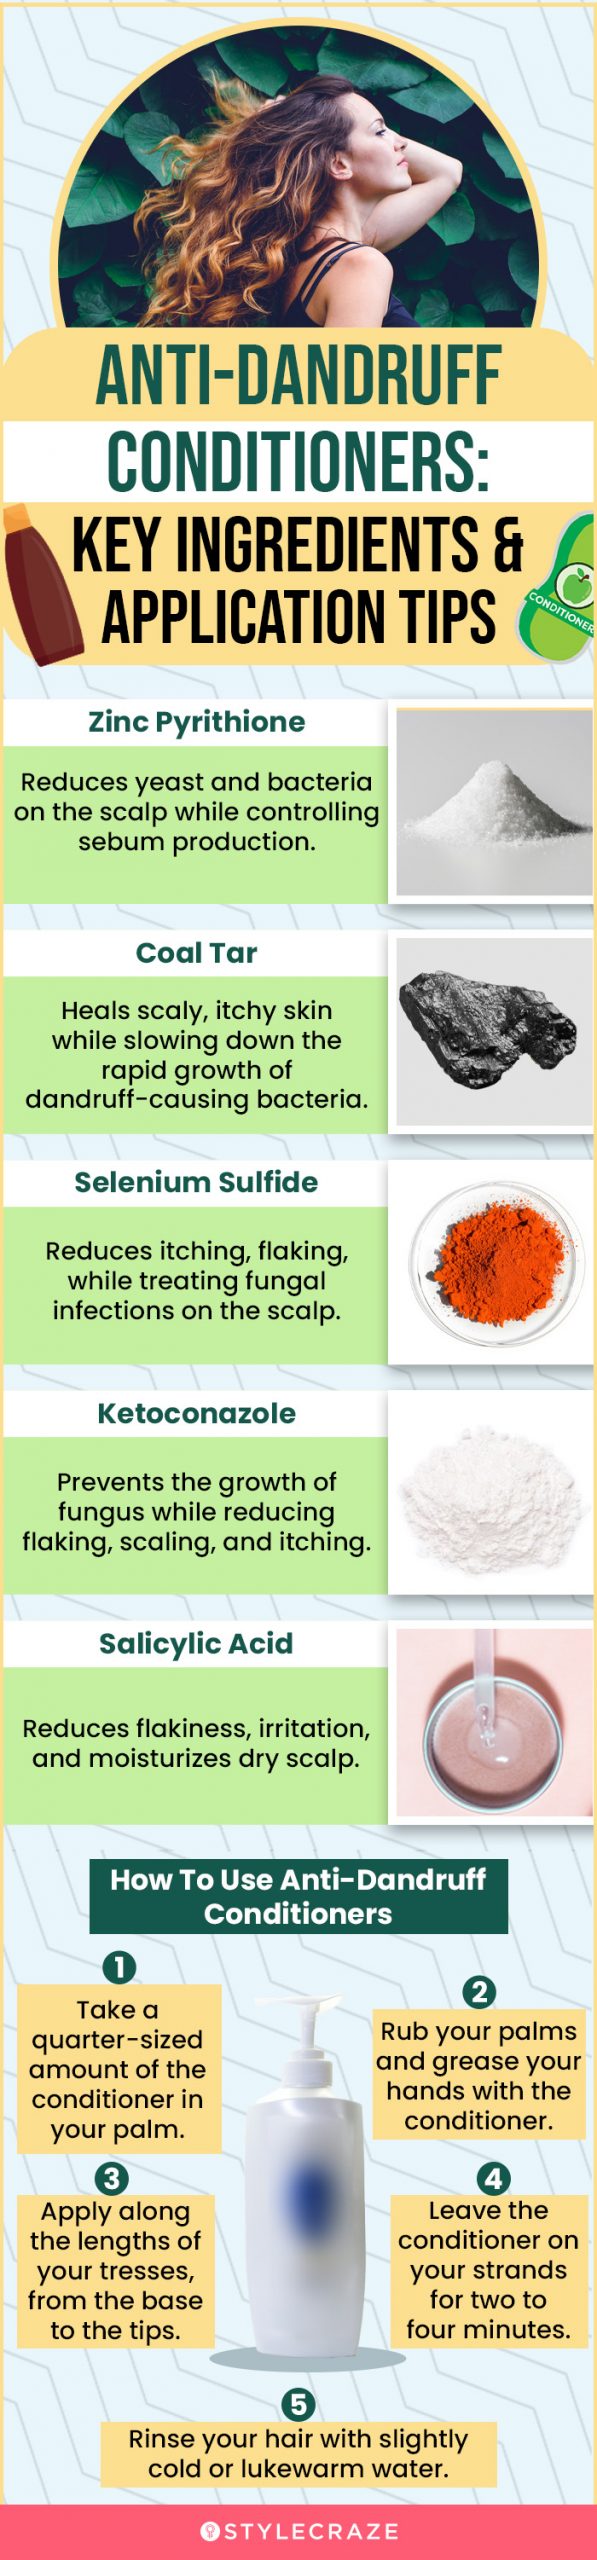 Anti-Dandruff Conditioners: Key Ingredients & Application Tips (infographic)